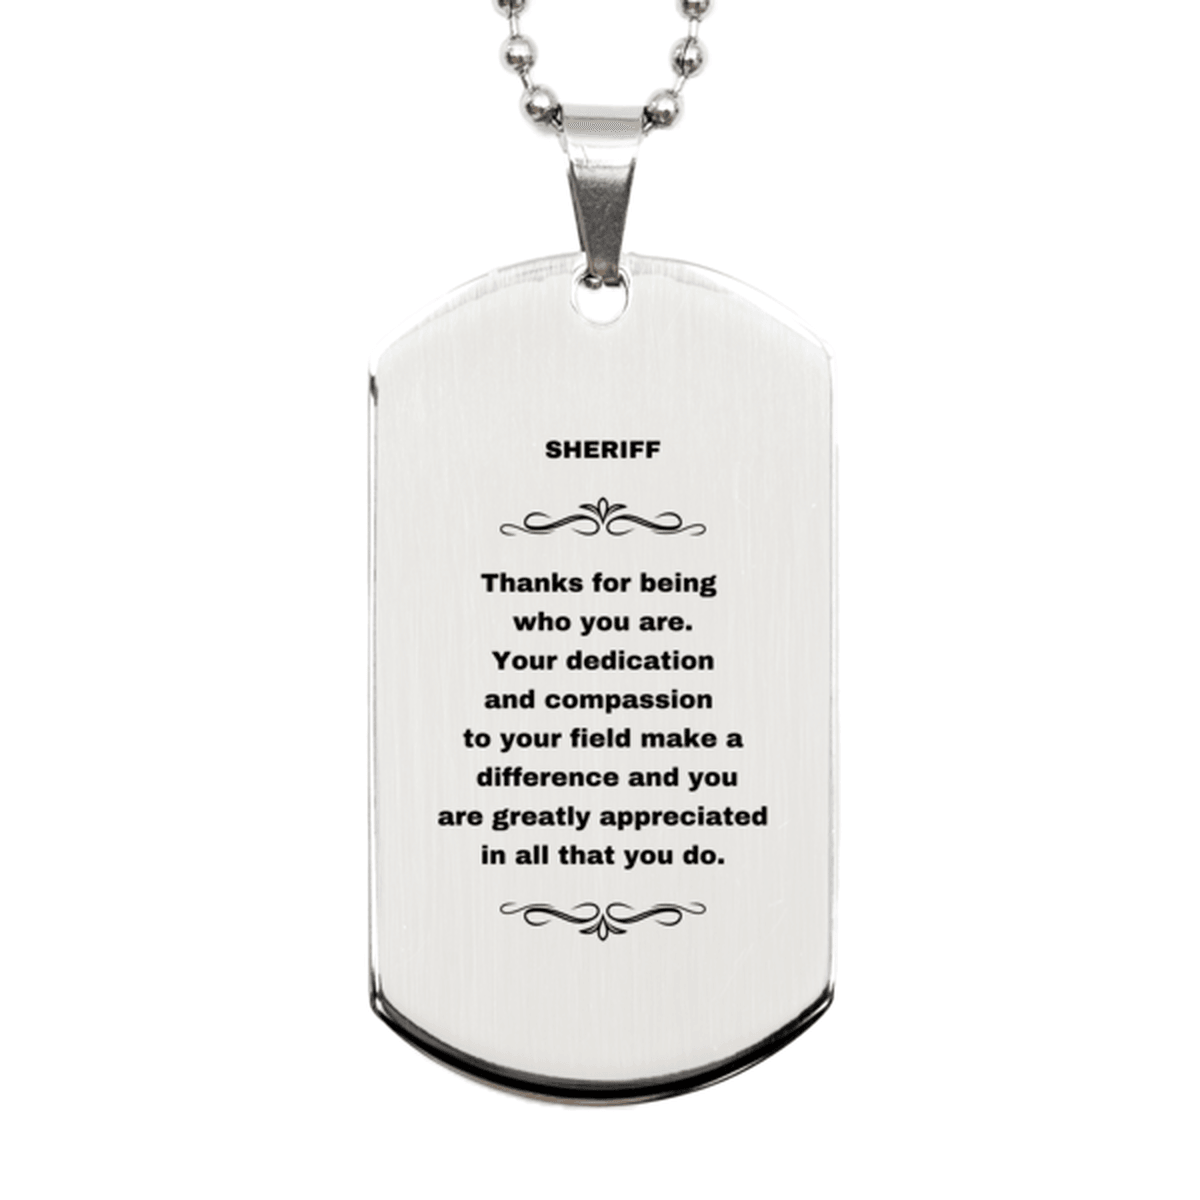 Sheriff Silver Engraved Dog Tag Necklace - Thanks for being who you are - Birthday Christmas Jewelry Gifts Coworkers Colleague Boss - Mallard Moon Gift Shop